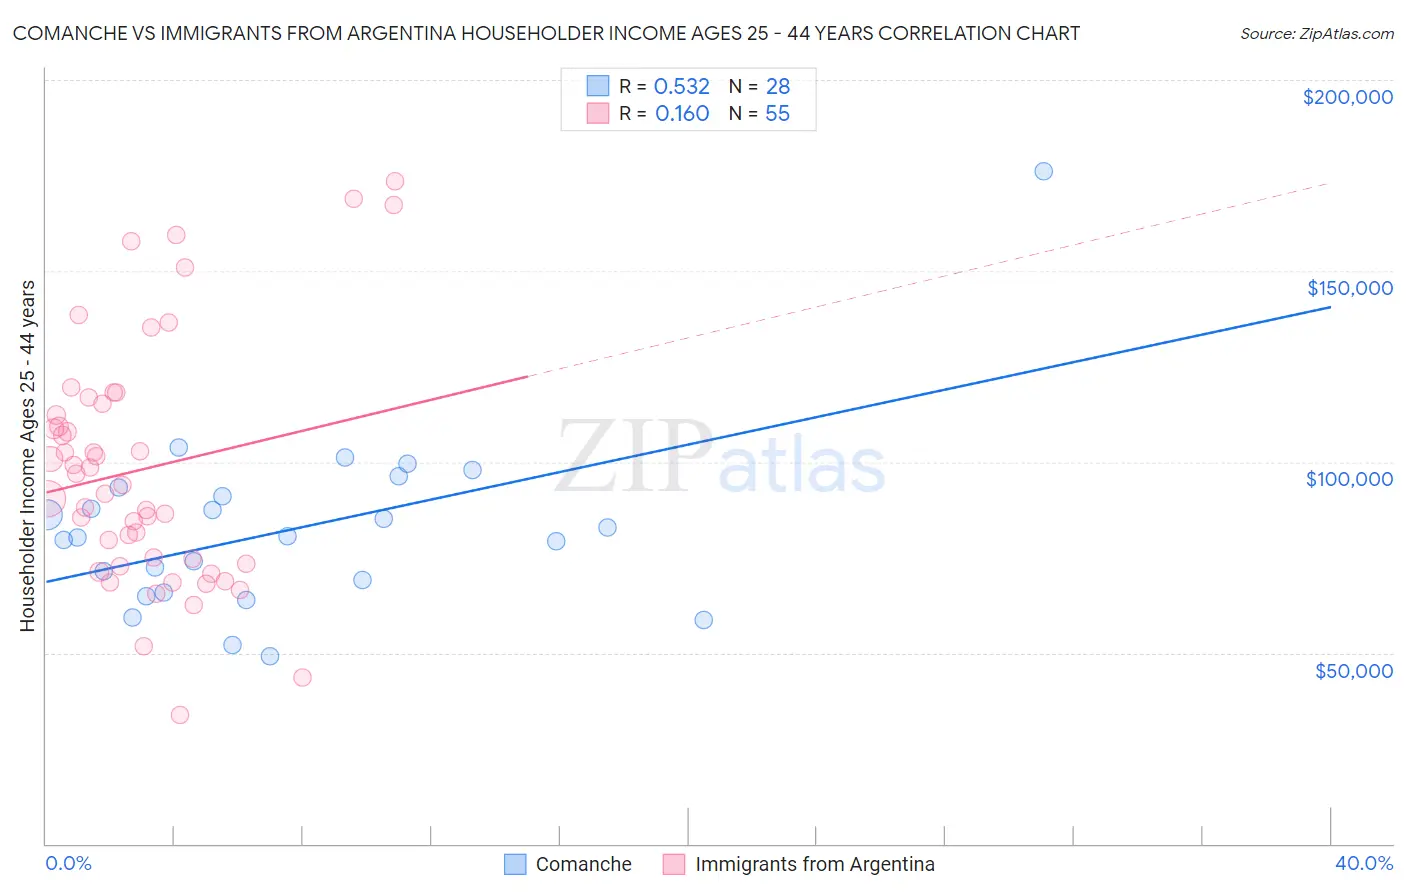 Comanche vs Immigrants from Argentina Householder Income Ages 25 - 44 years